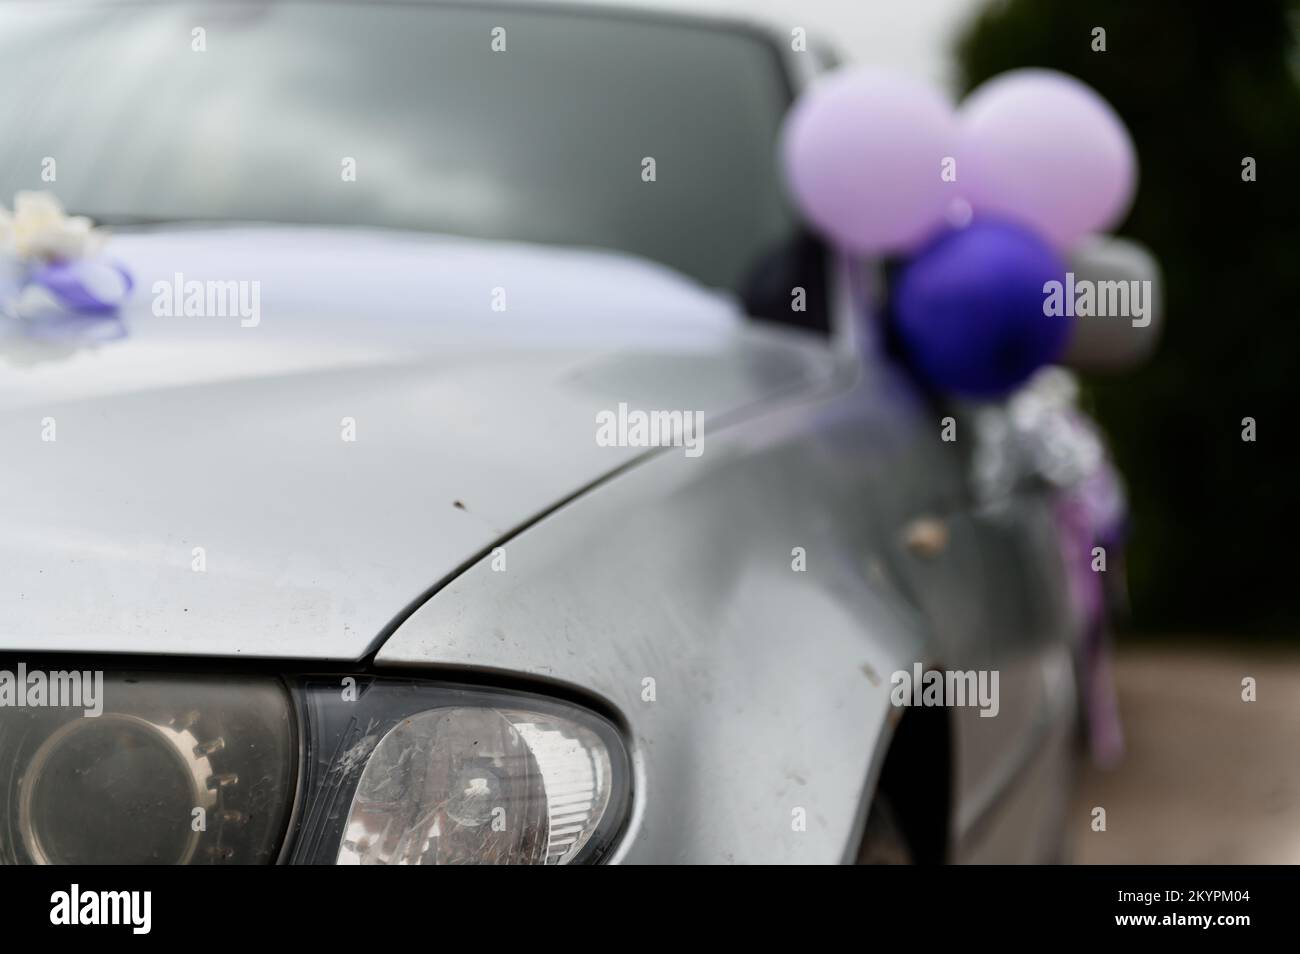 https://c8.alamy.com/comp/2KYPM04/car-decoration-for-a-wedding-decorations-on-the-car-of-the-newlyweds-cortege-at-the-wedding-2KYPM04.jpg